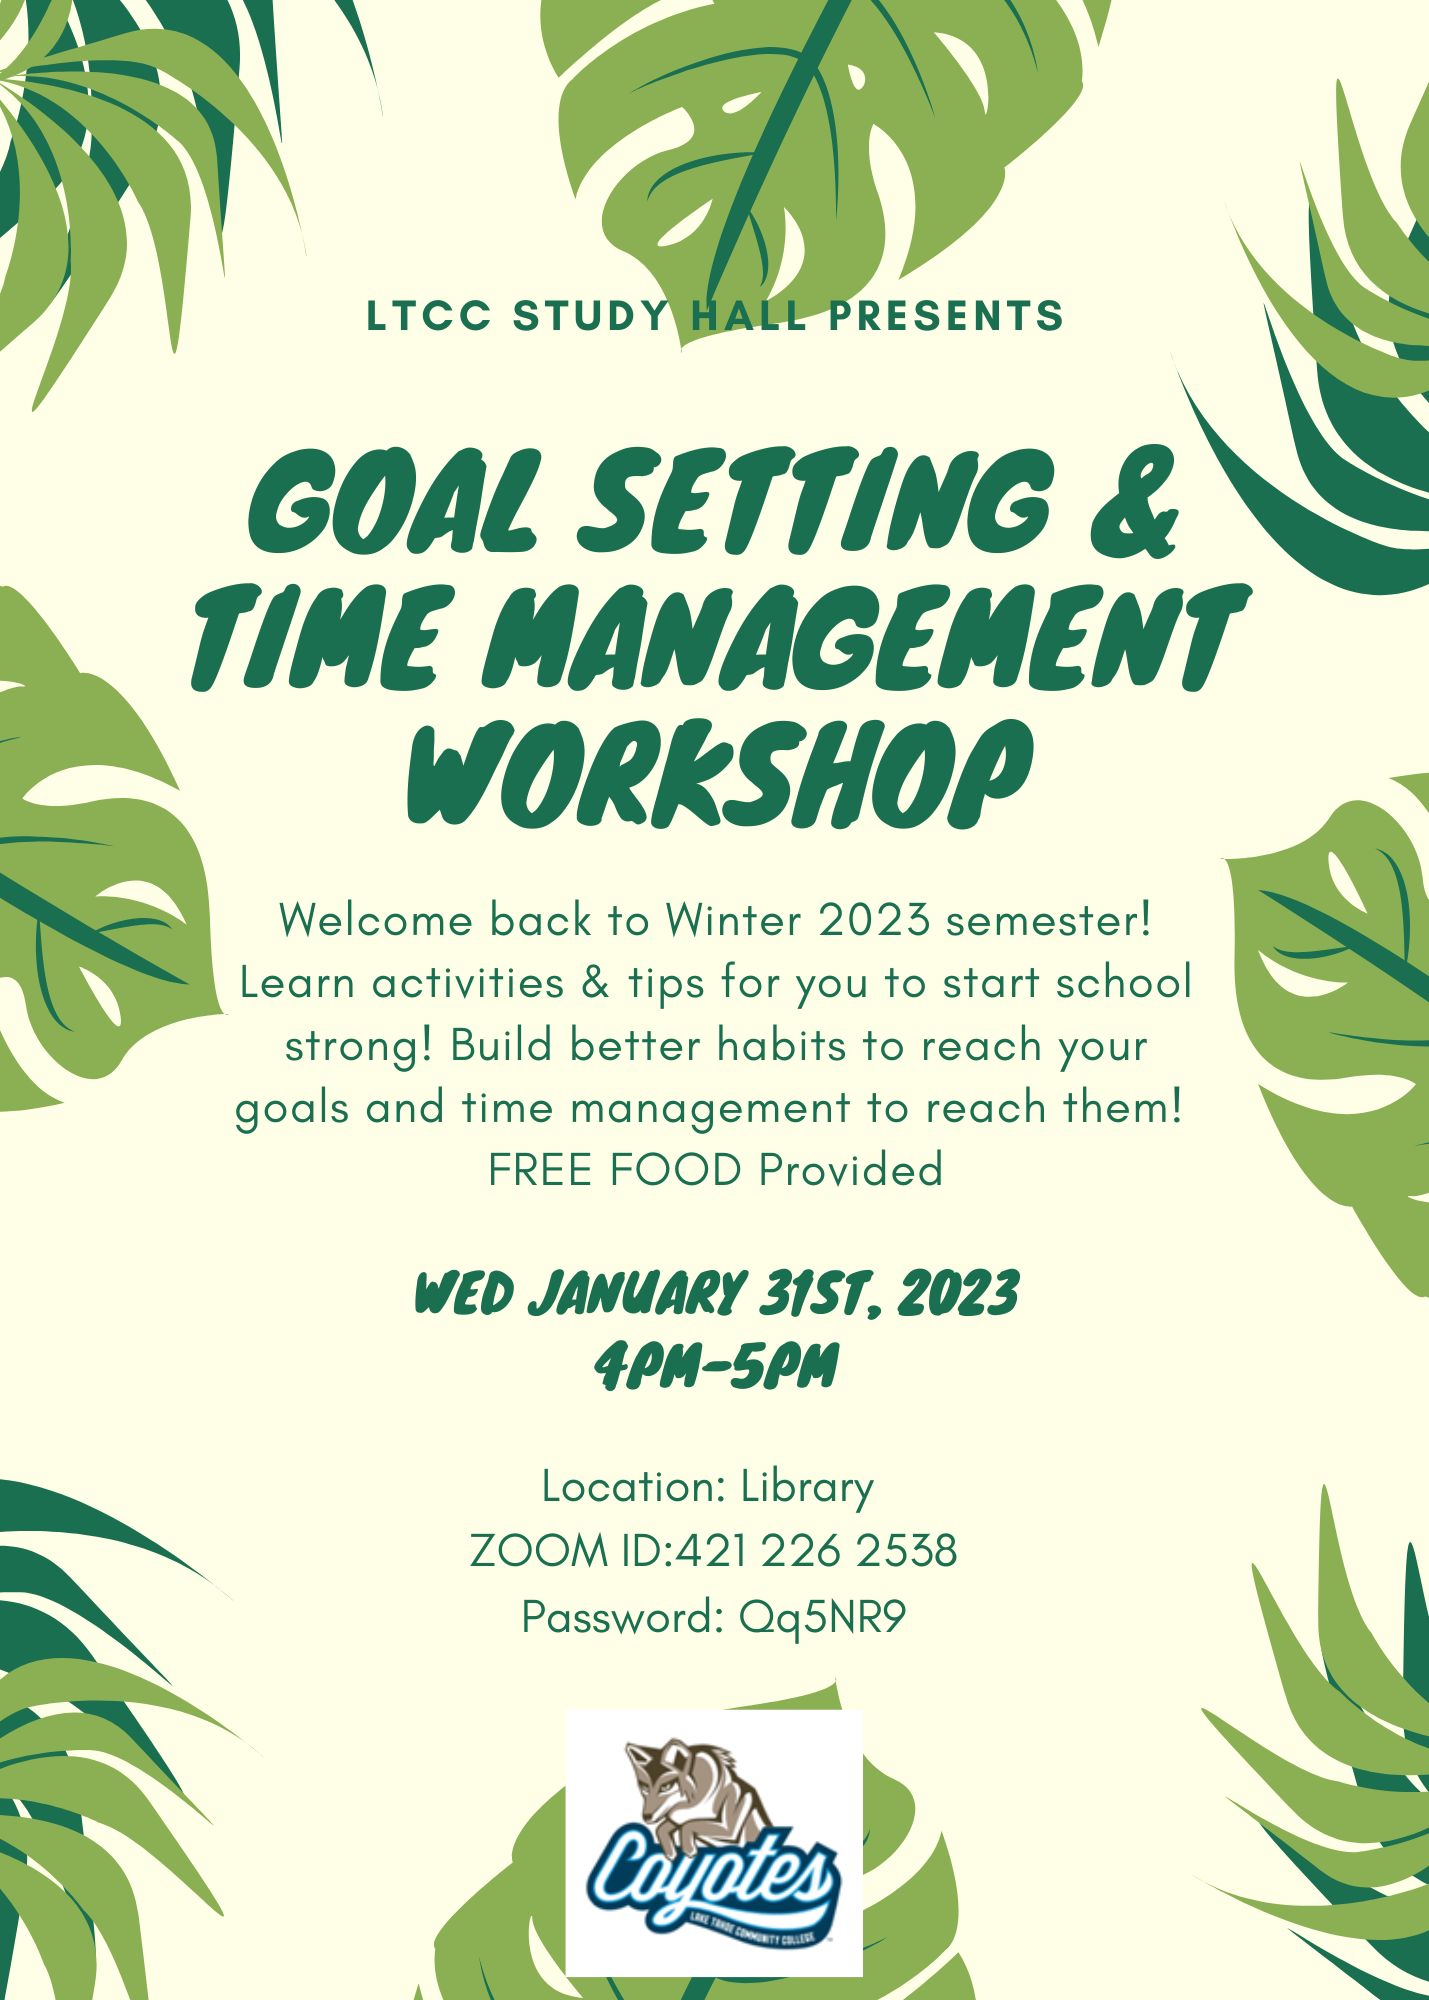 flier for Goal Setting Workshop on Wednesday January 31st at 4pm in the LTCC Library